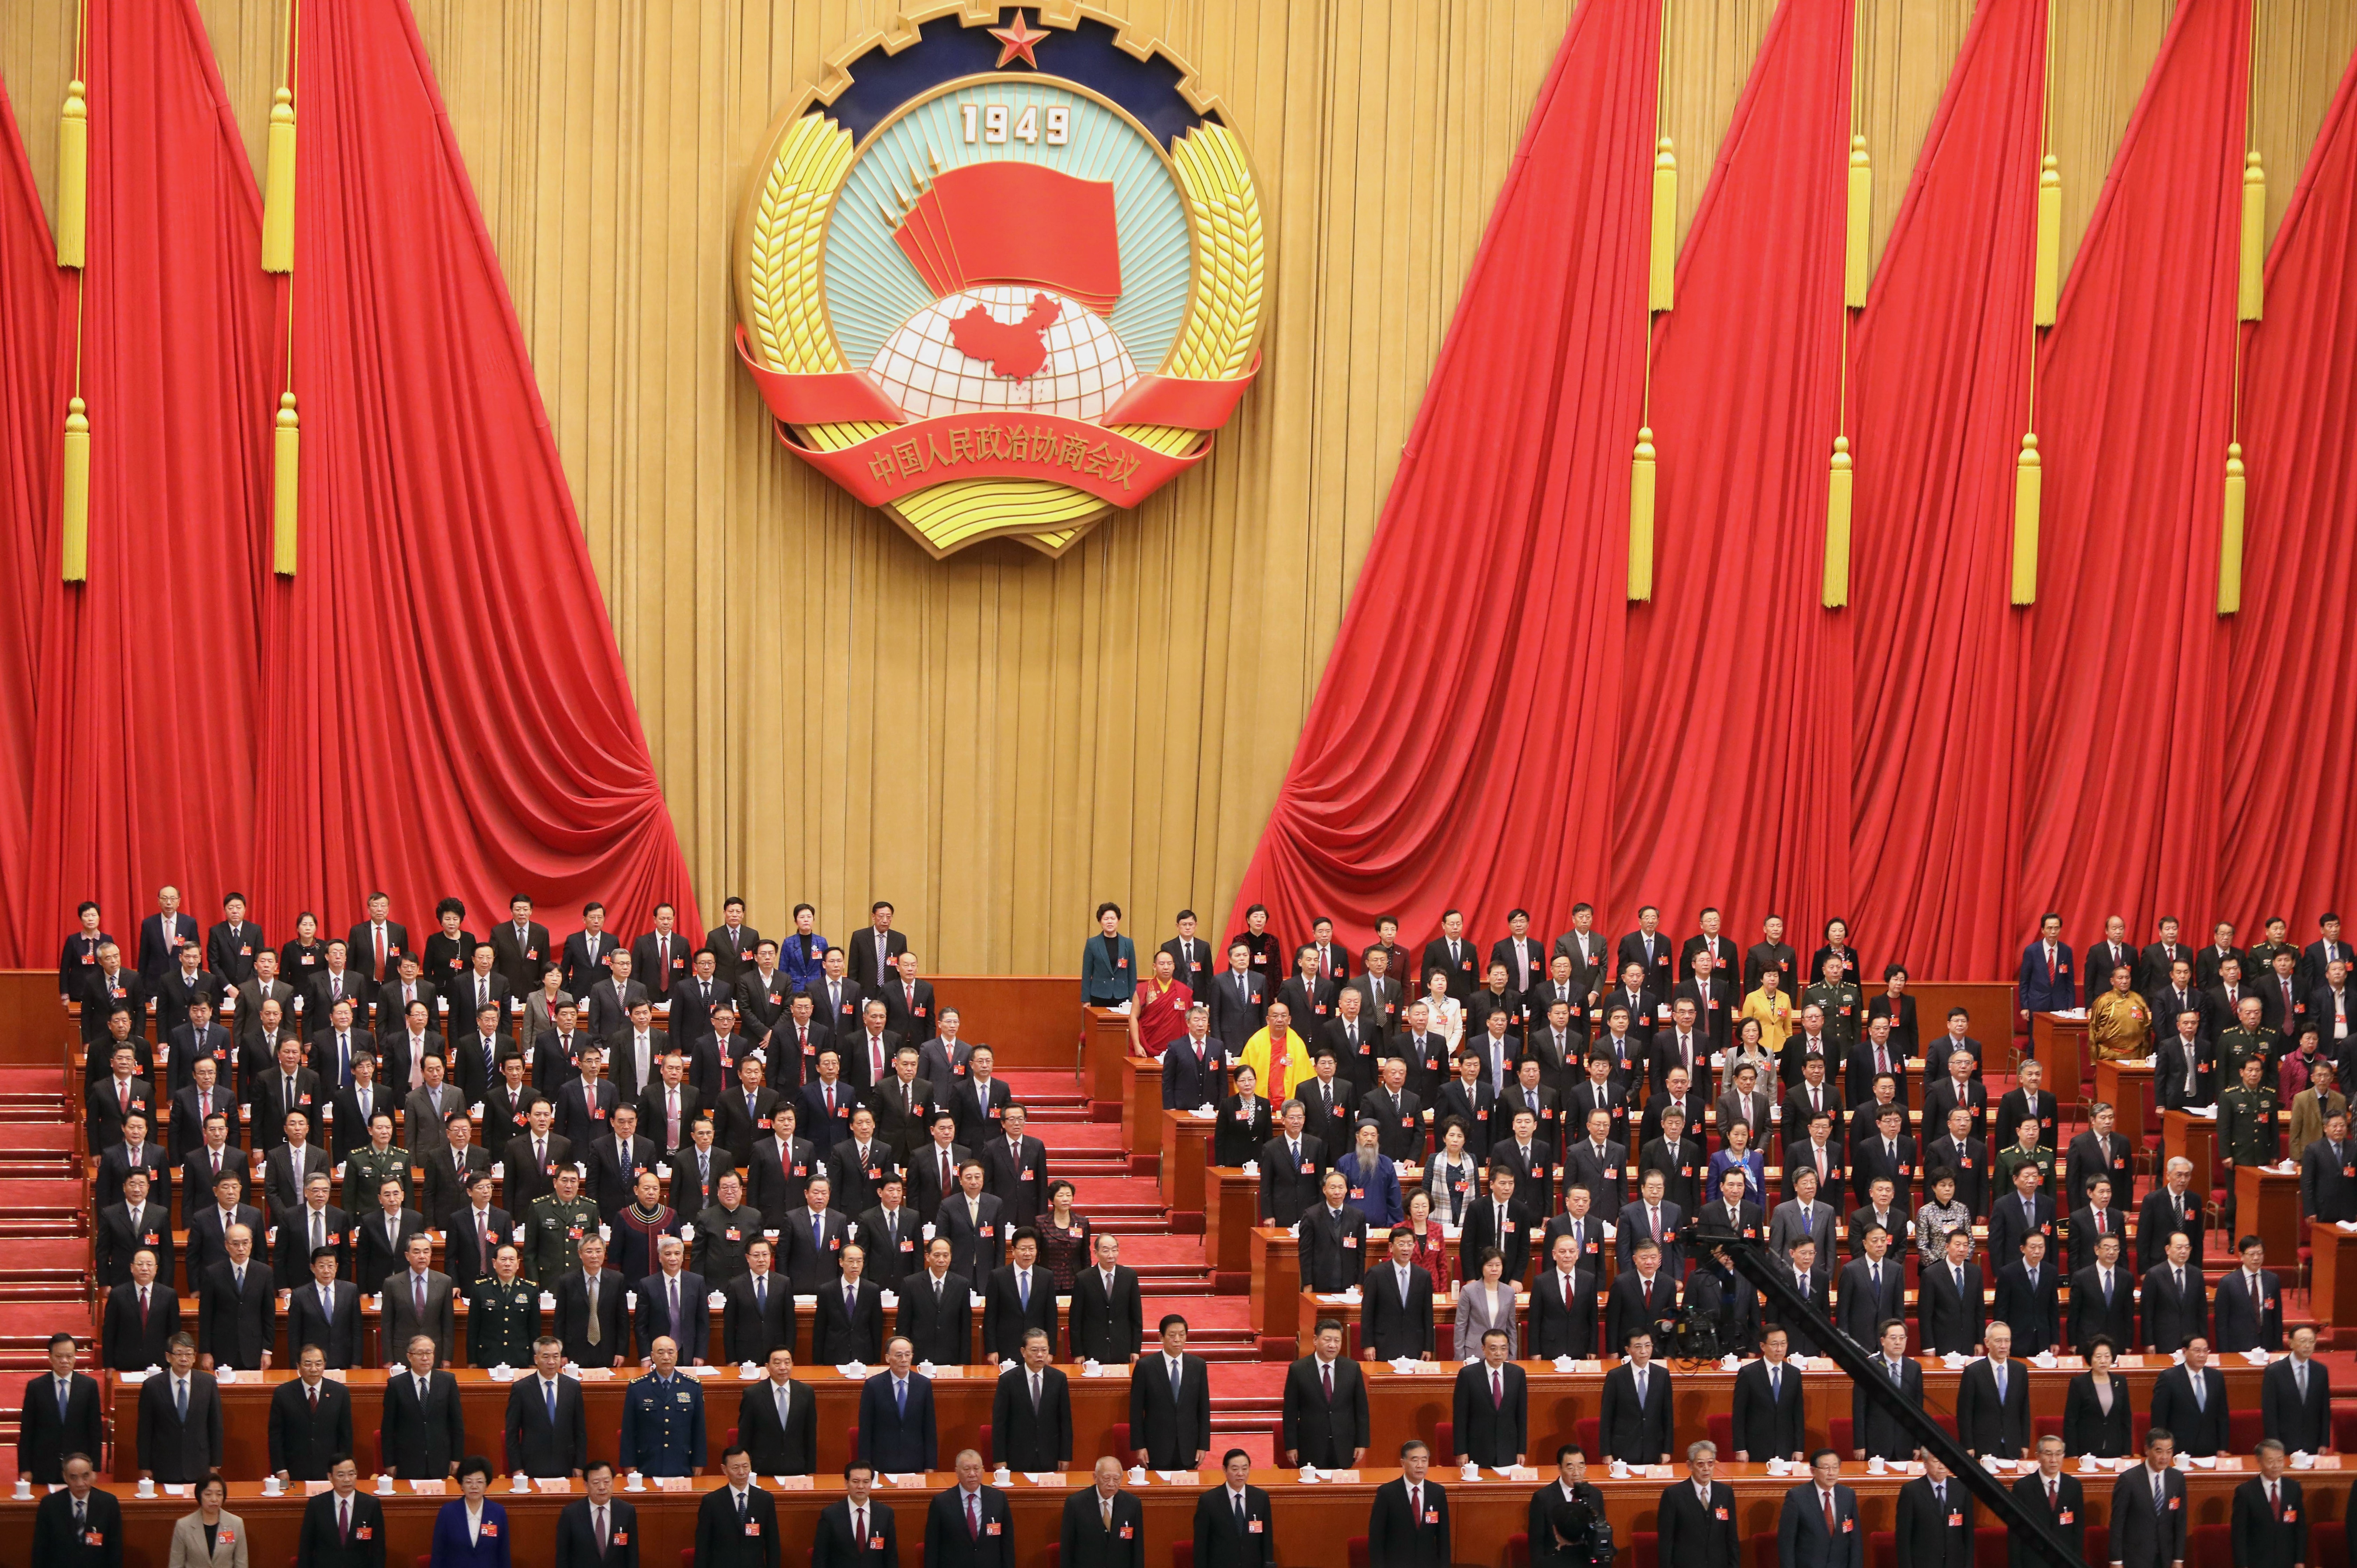 The annual meeting of the Chinese People’s Political Consultative Conference opens at the Great Hall of the People in Beijing on Sunday. Photo: Simon Song